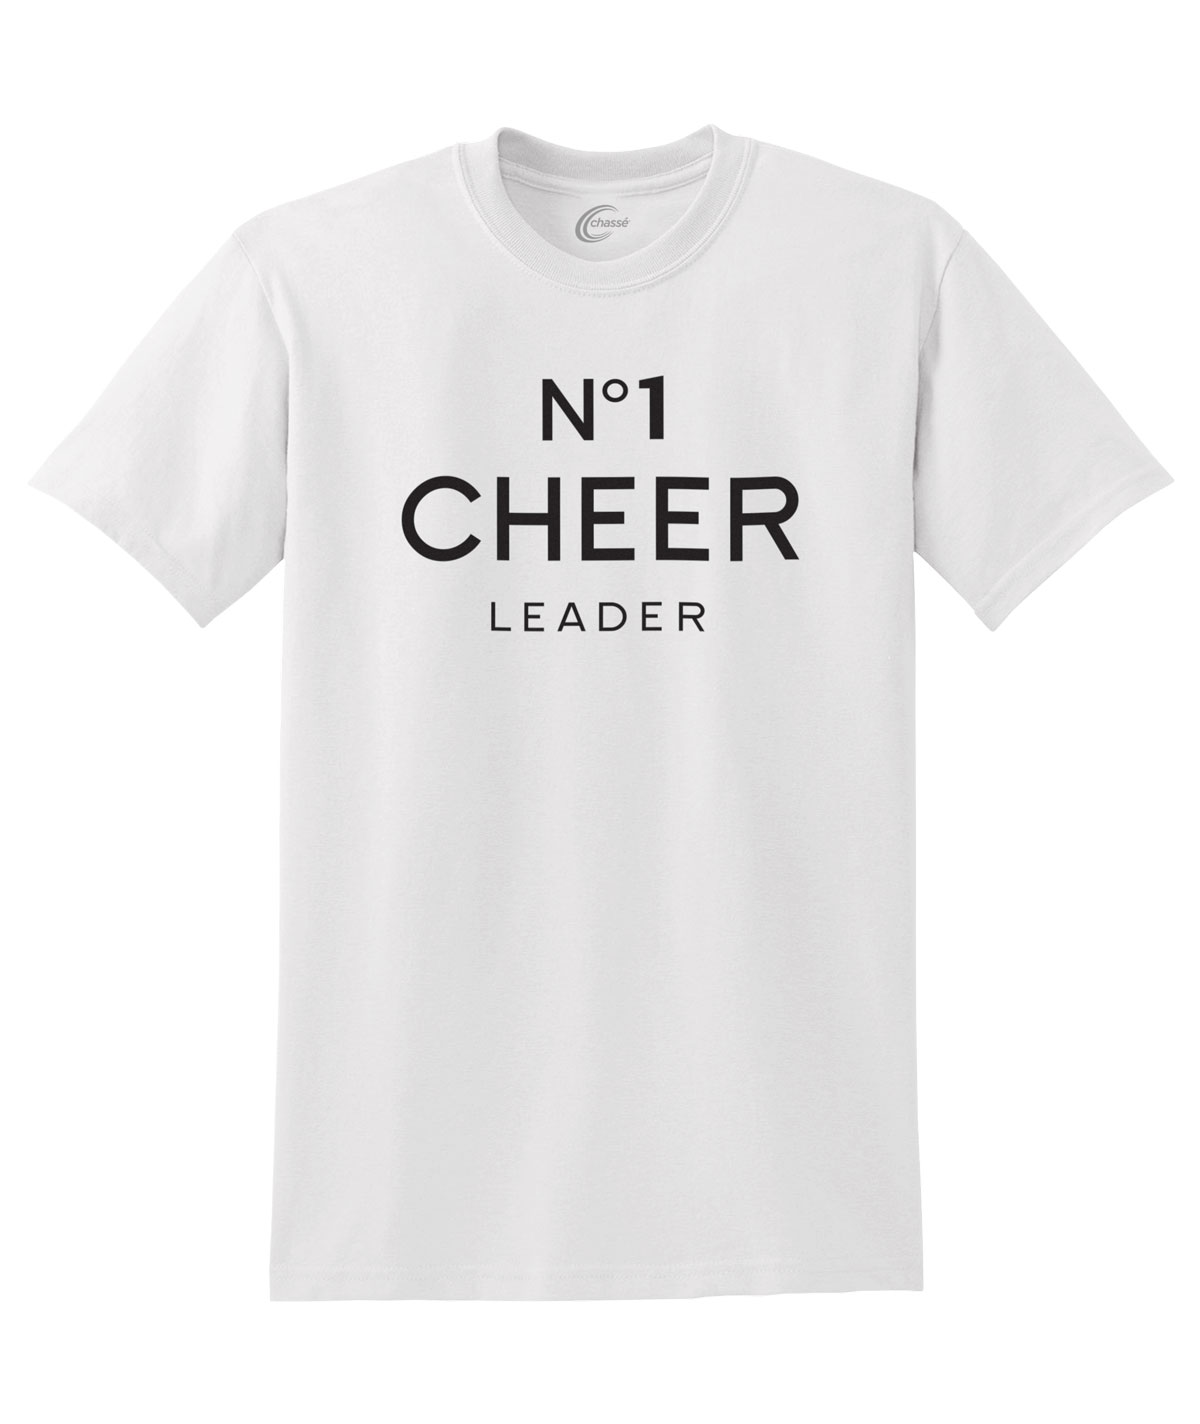 Chasse No 1 Cheer Leader Tee